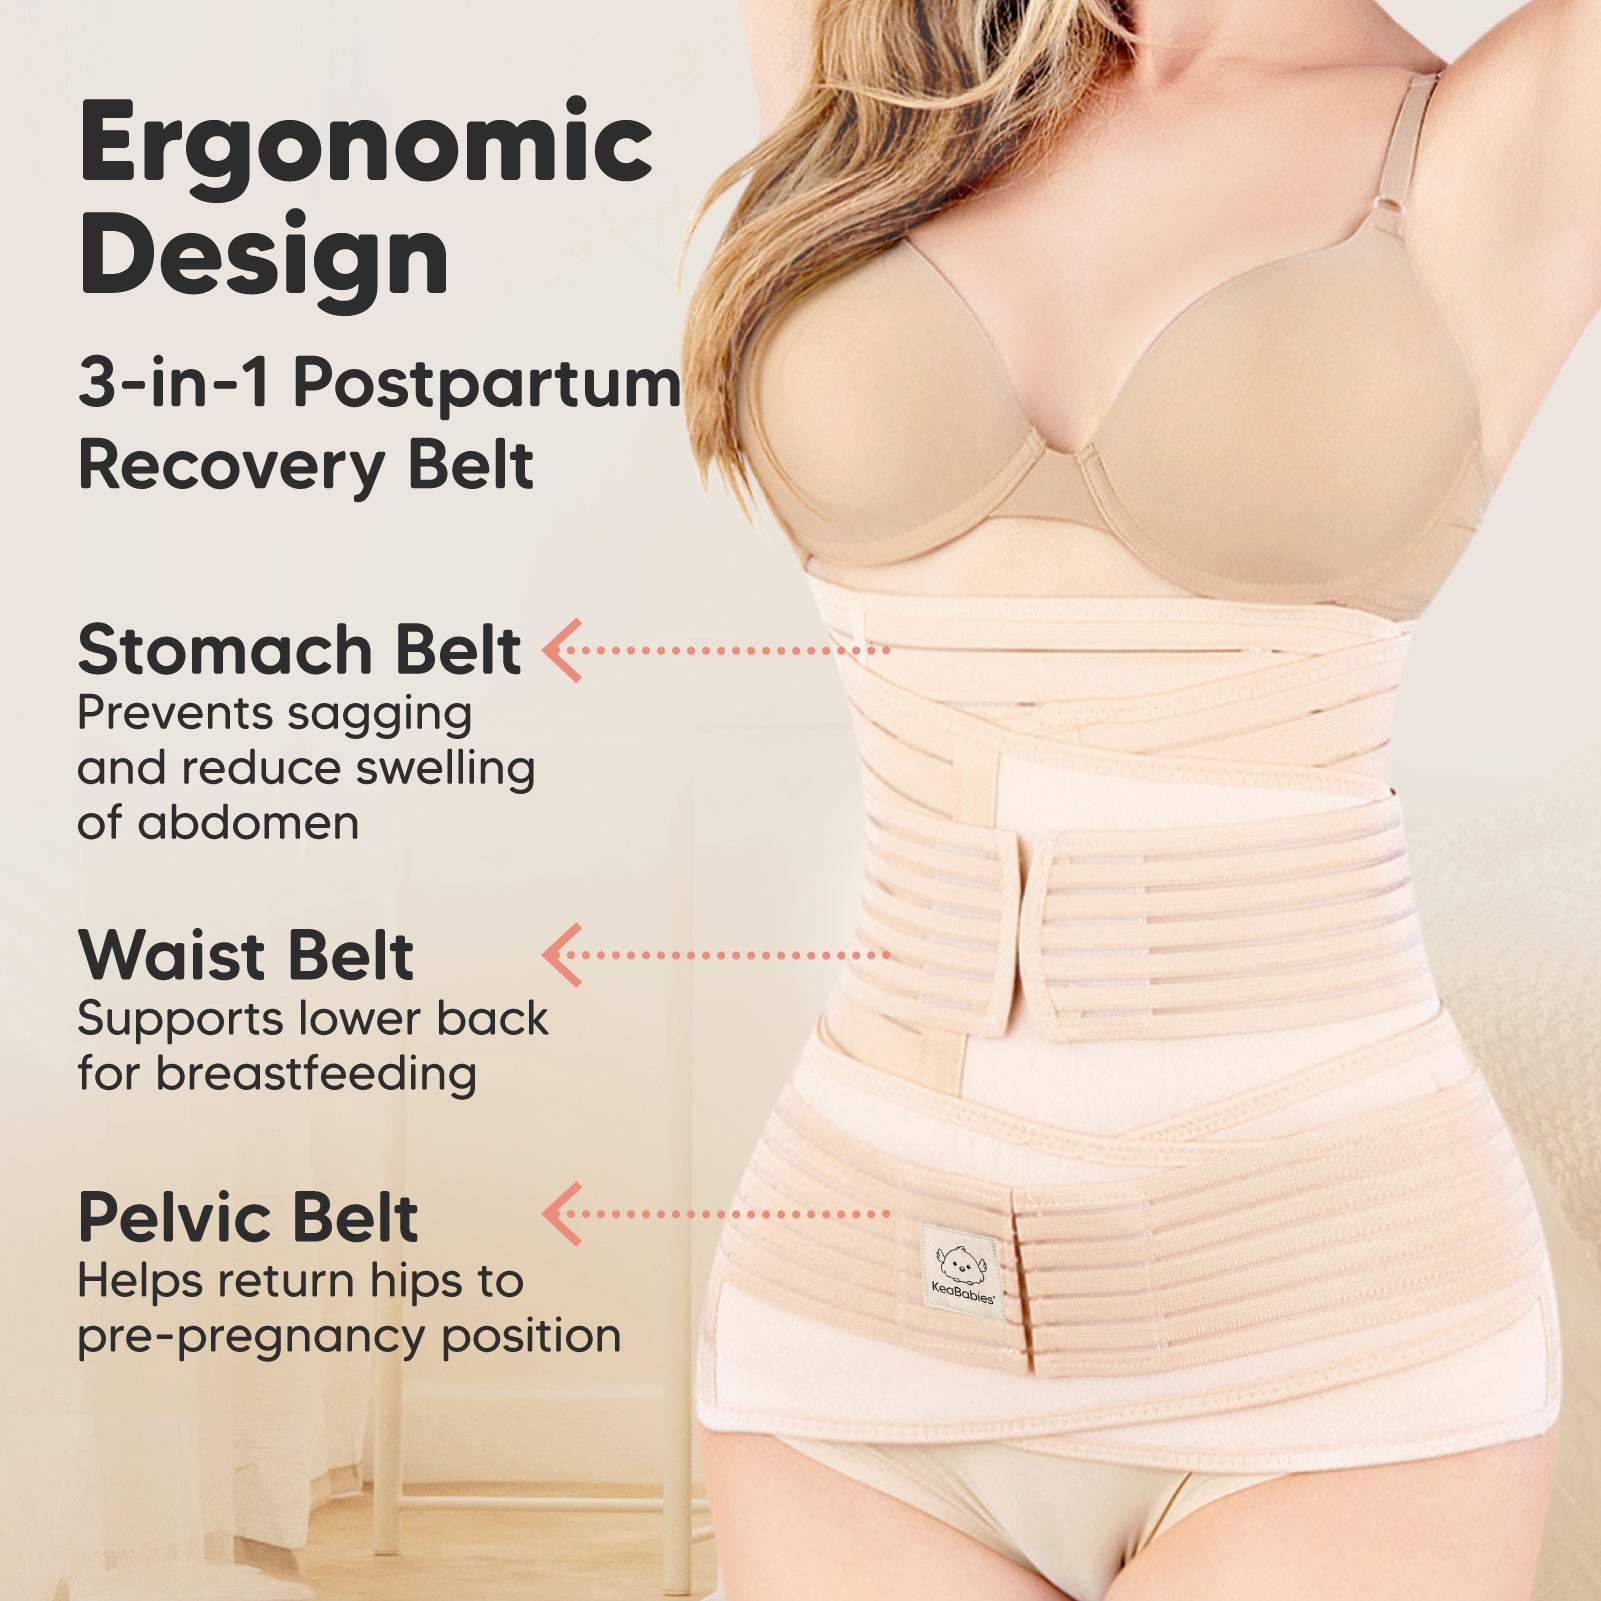 Diastasis Recti: Causes and Treatment - Original Babybellyband by CABEA  Maternity Support Belt 3-in-1 Pregnancy Pelvic Band Postpartum Wrap